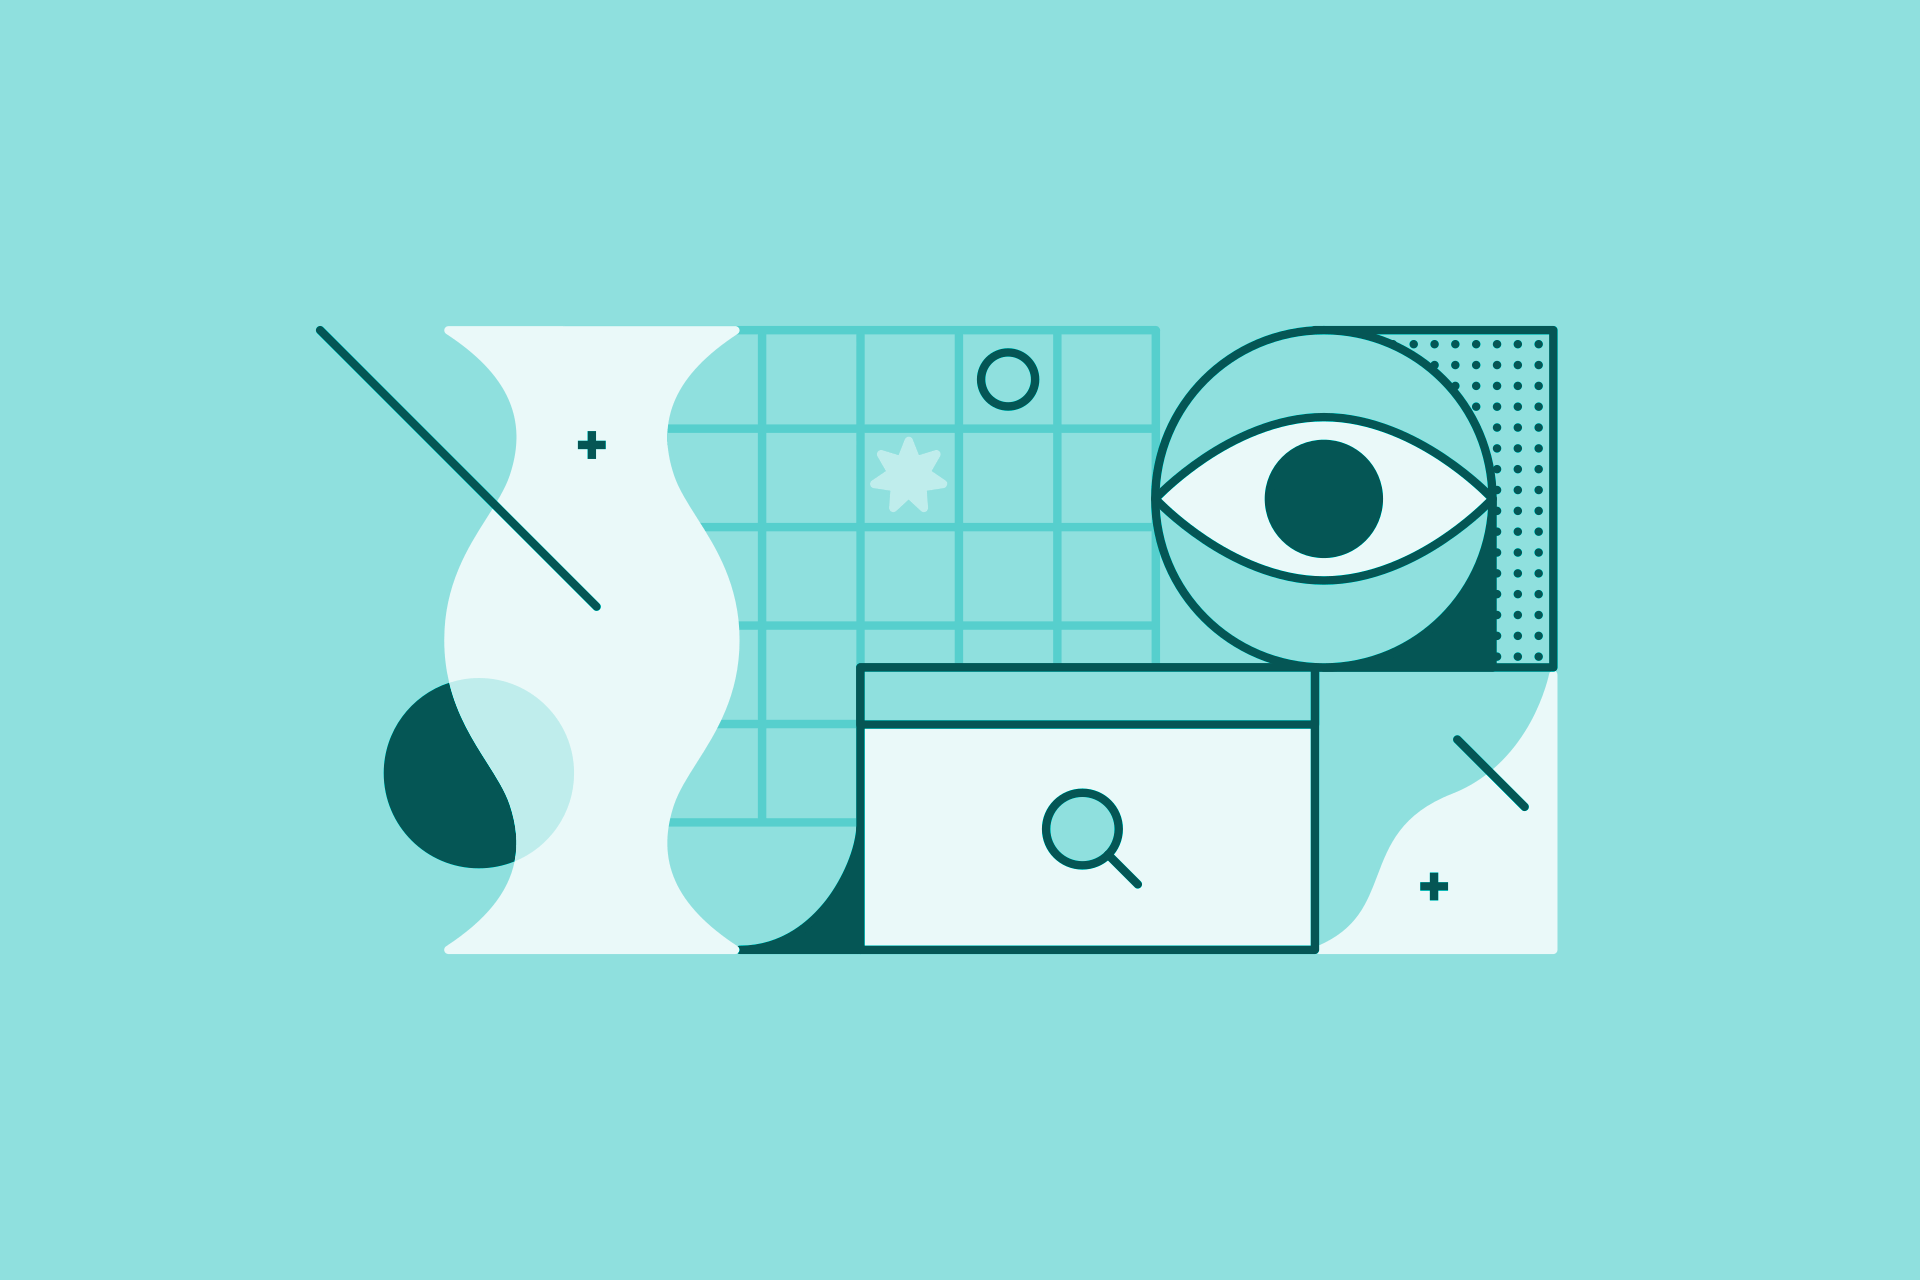 Abstract illustration of web browser, eye, and various shapes